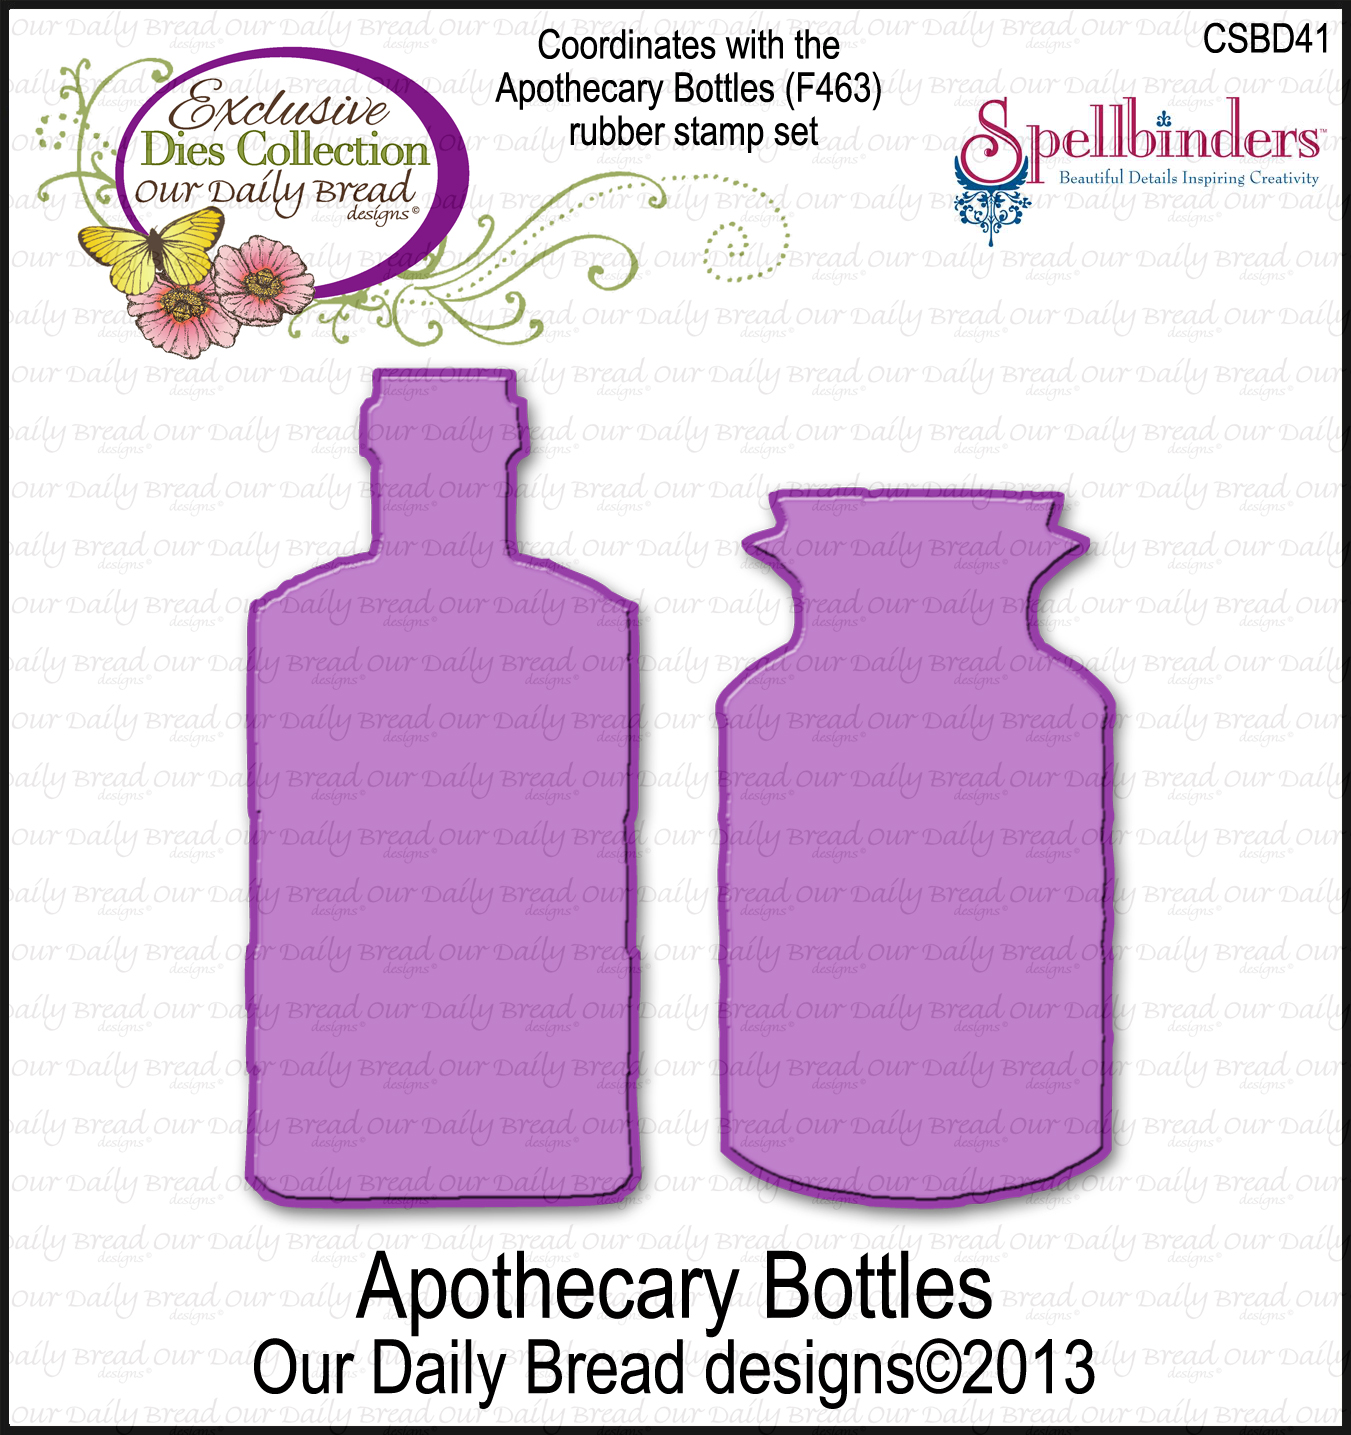 http://www.ourdailybreaddesigns.com/index.php/apothecary-bottles-1003.html